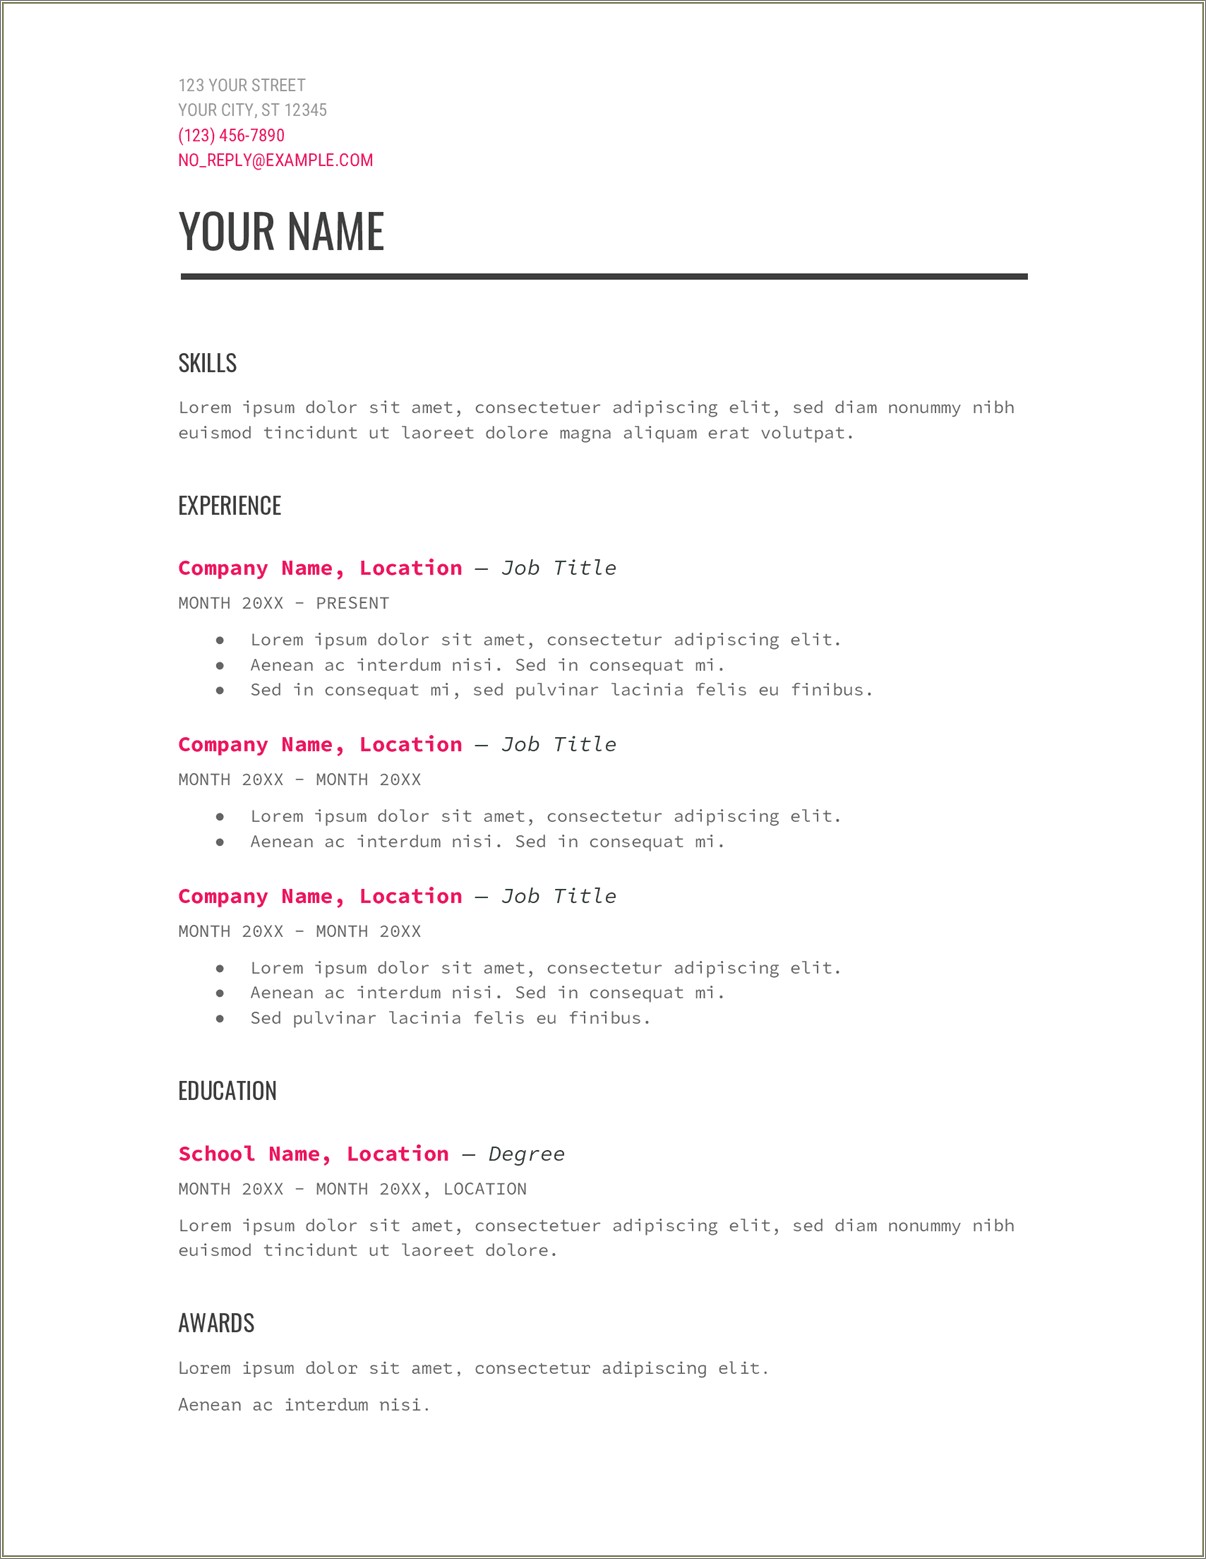 Resume Templates With Lots Of Info